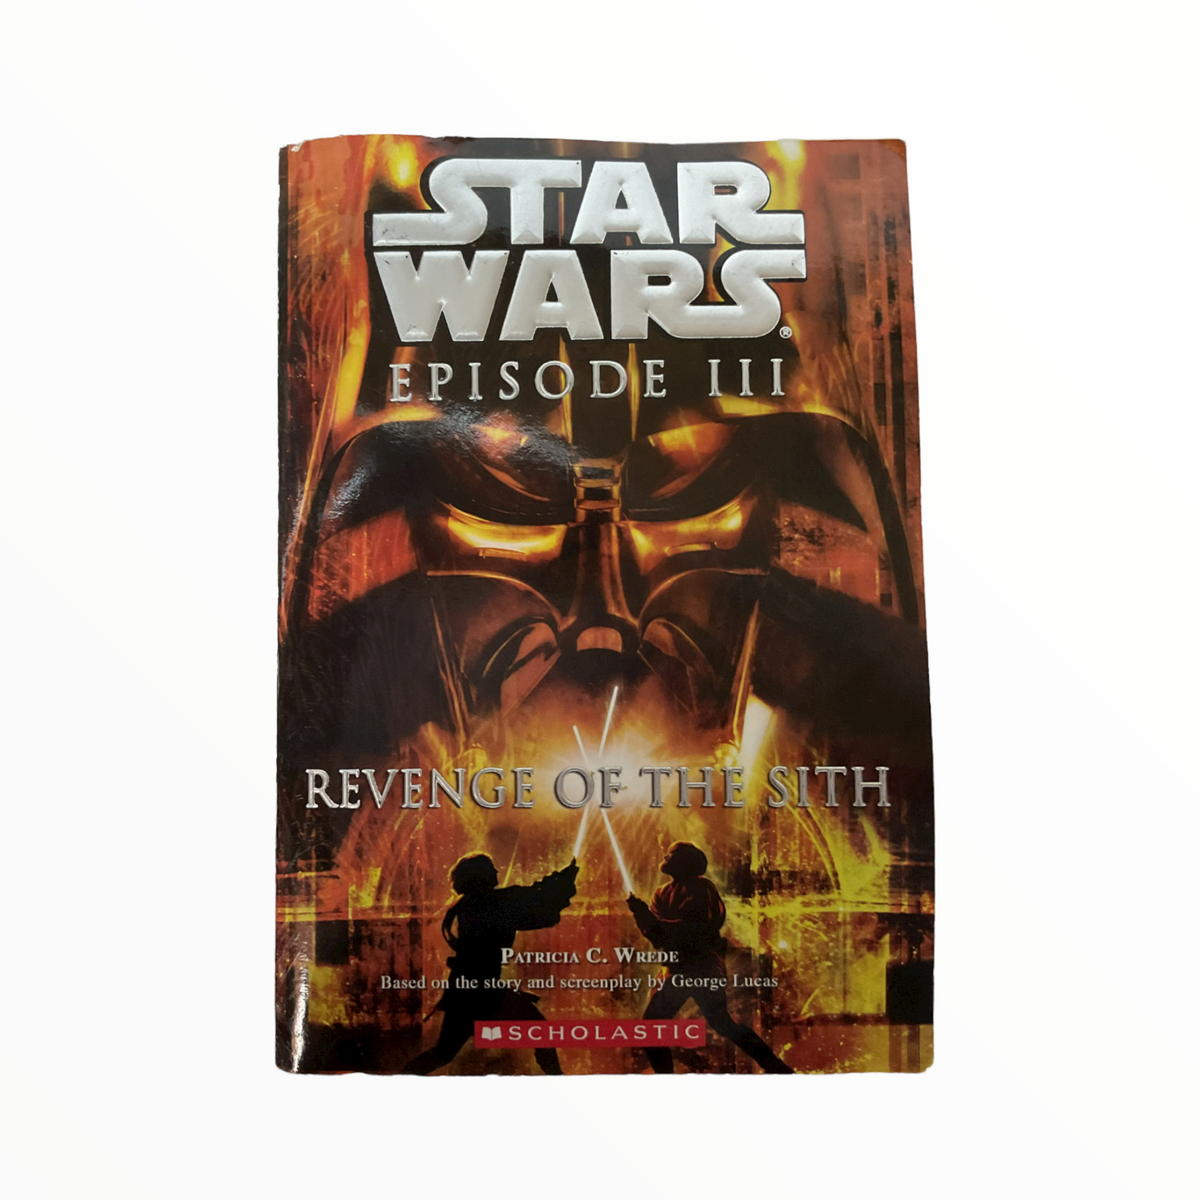 Star Wars Episode III Revenge Of The Sith Scholastic story Book